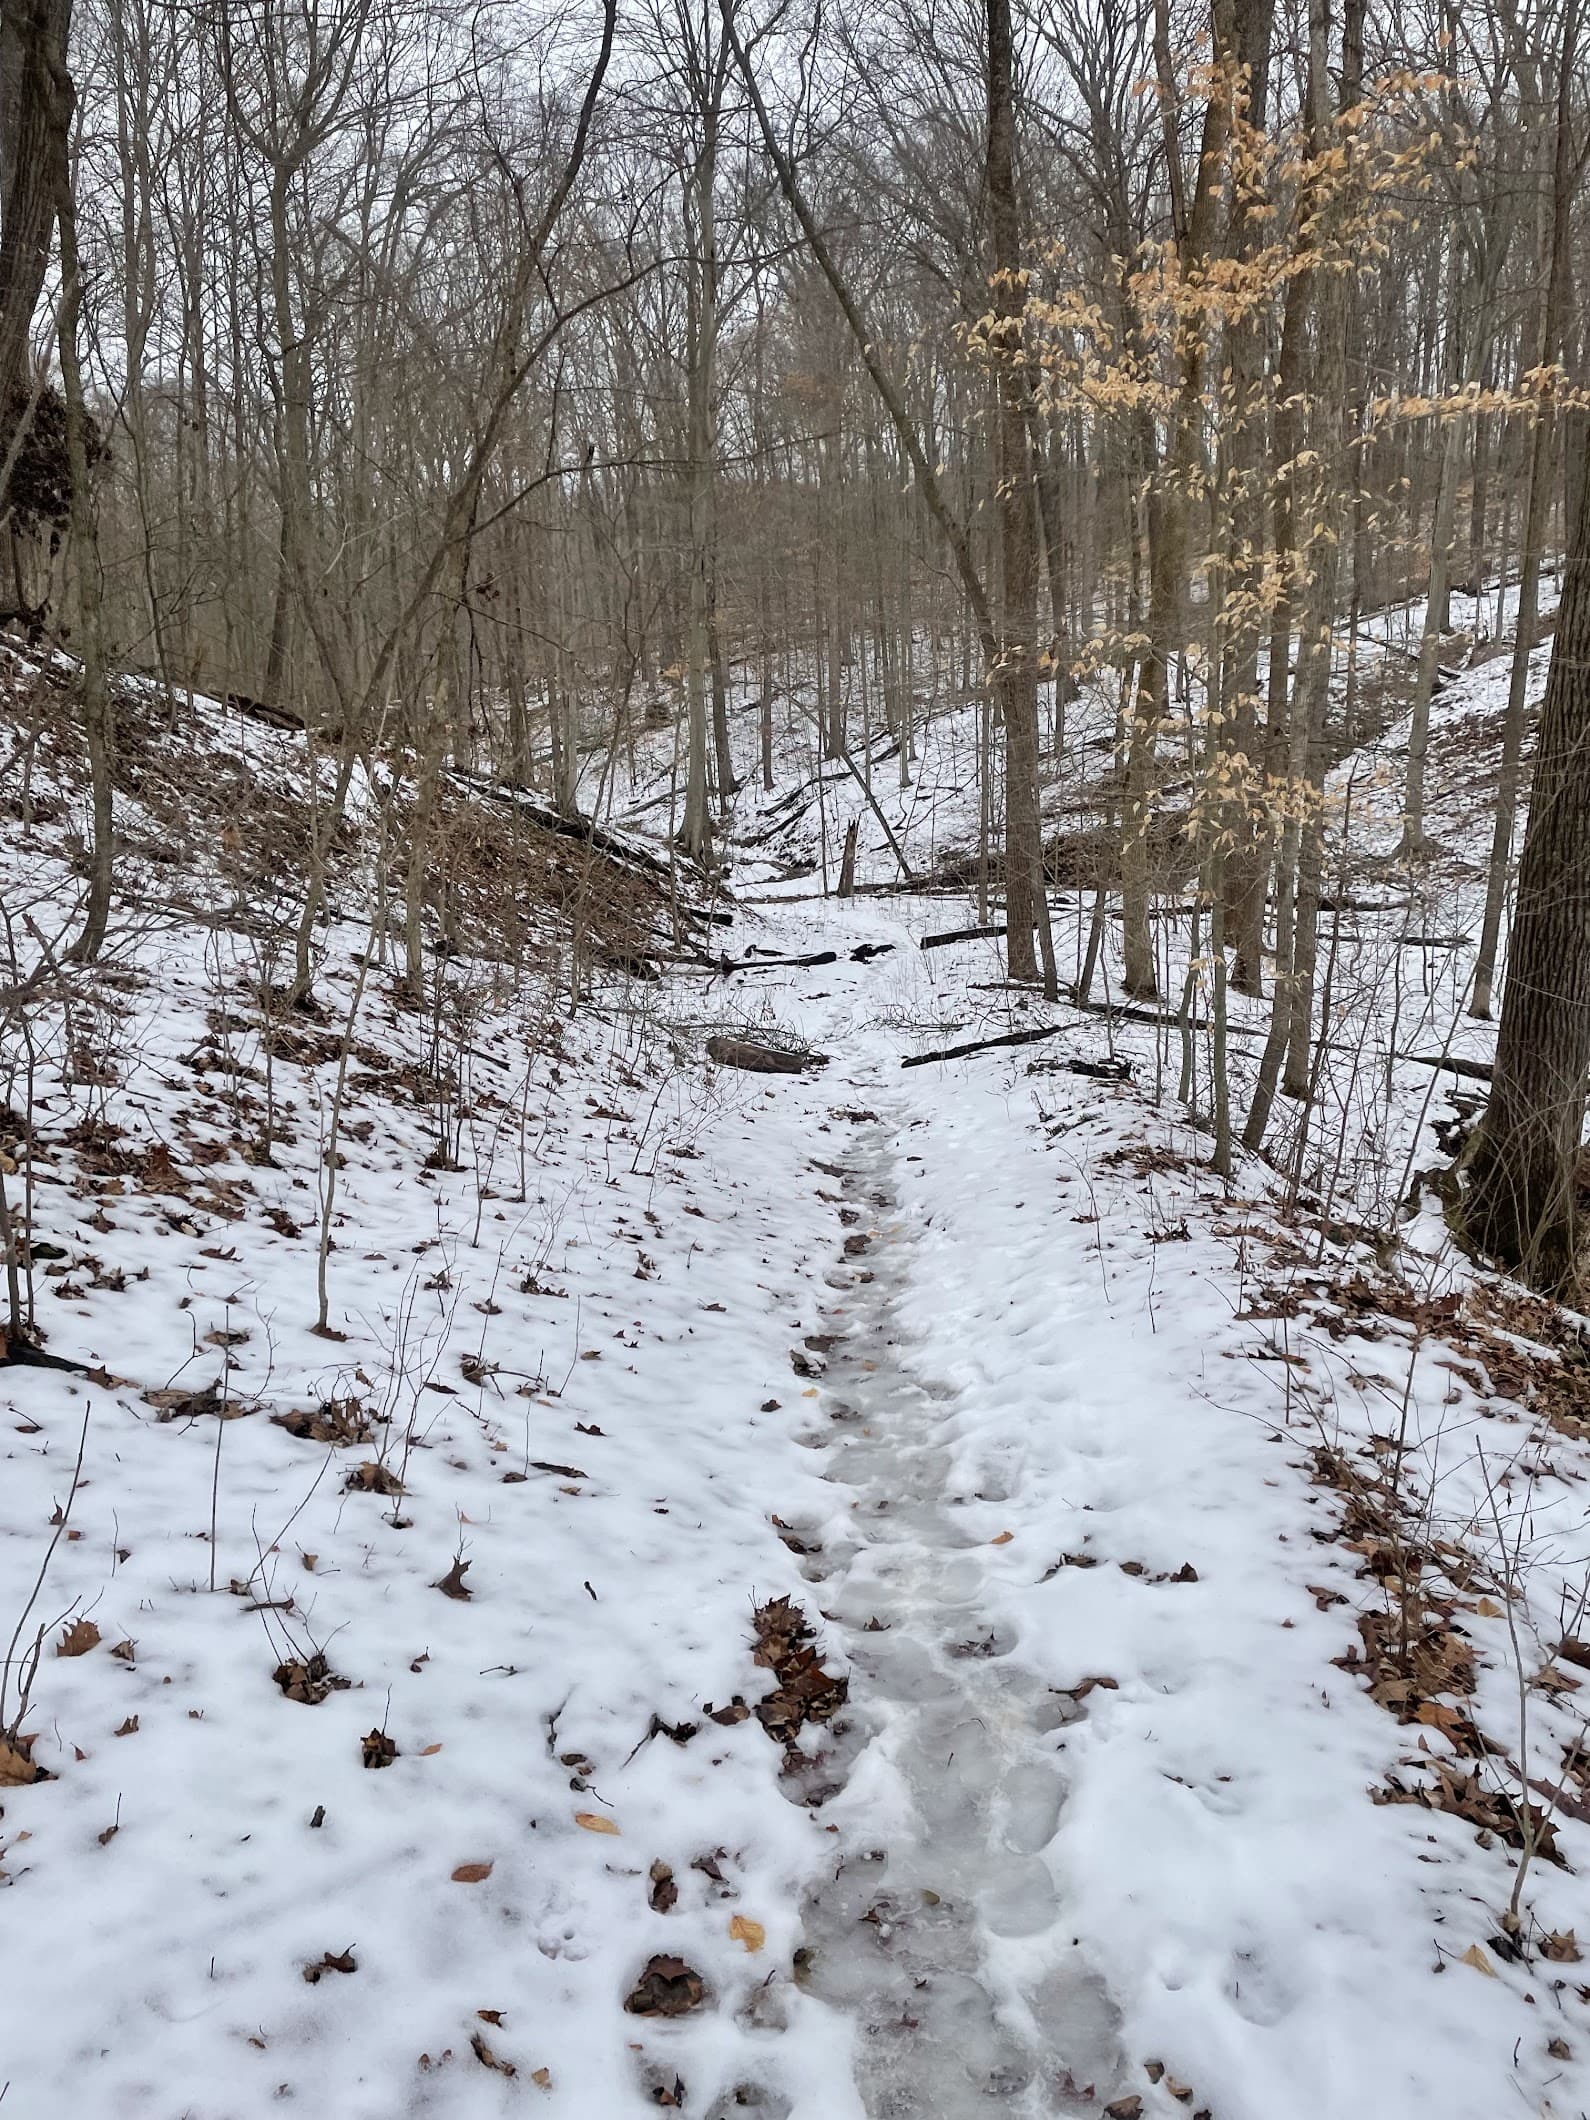 Why I found myself running 50 miles alone in the wintertime